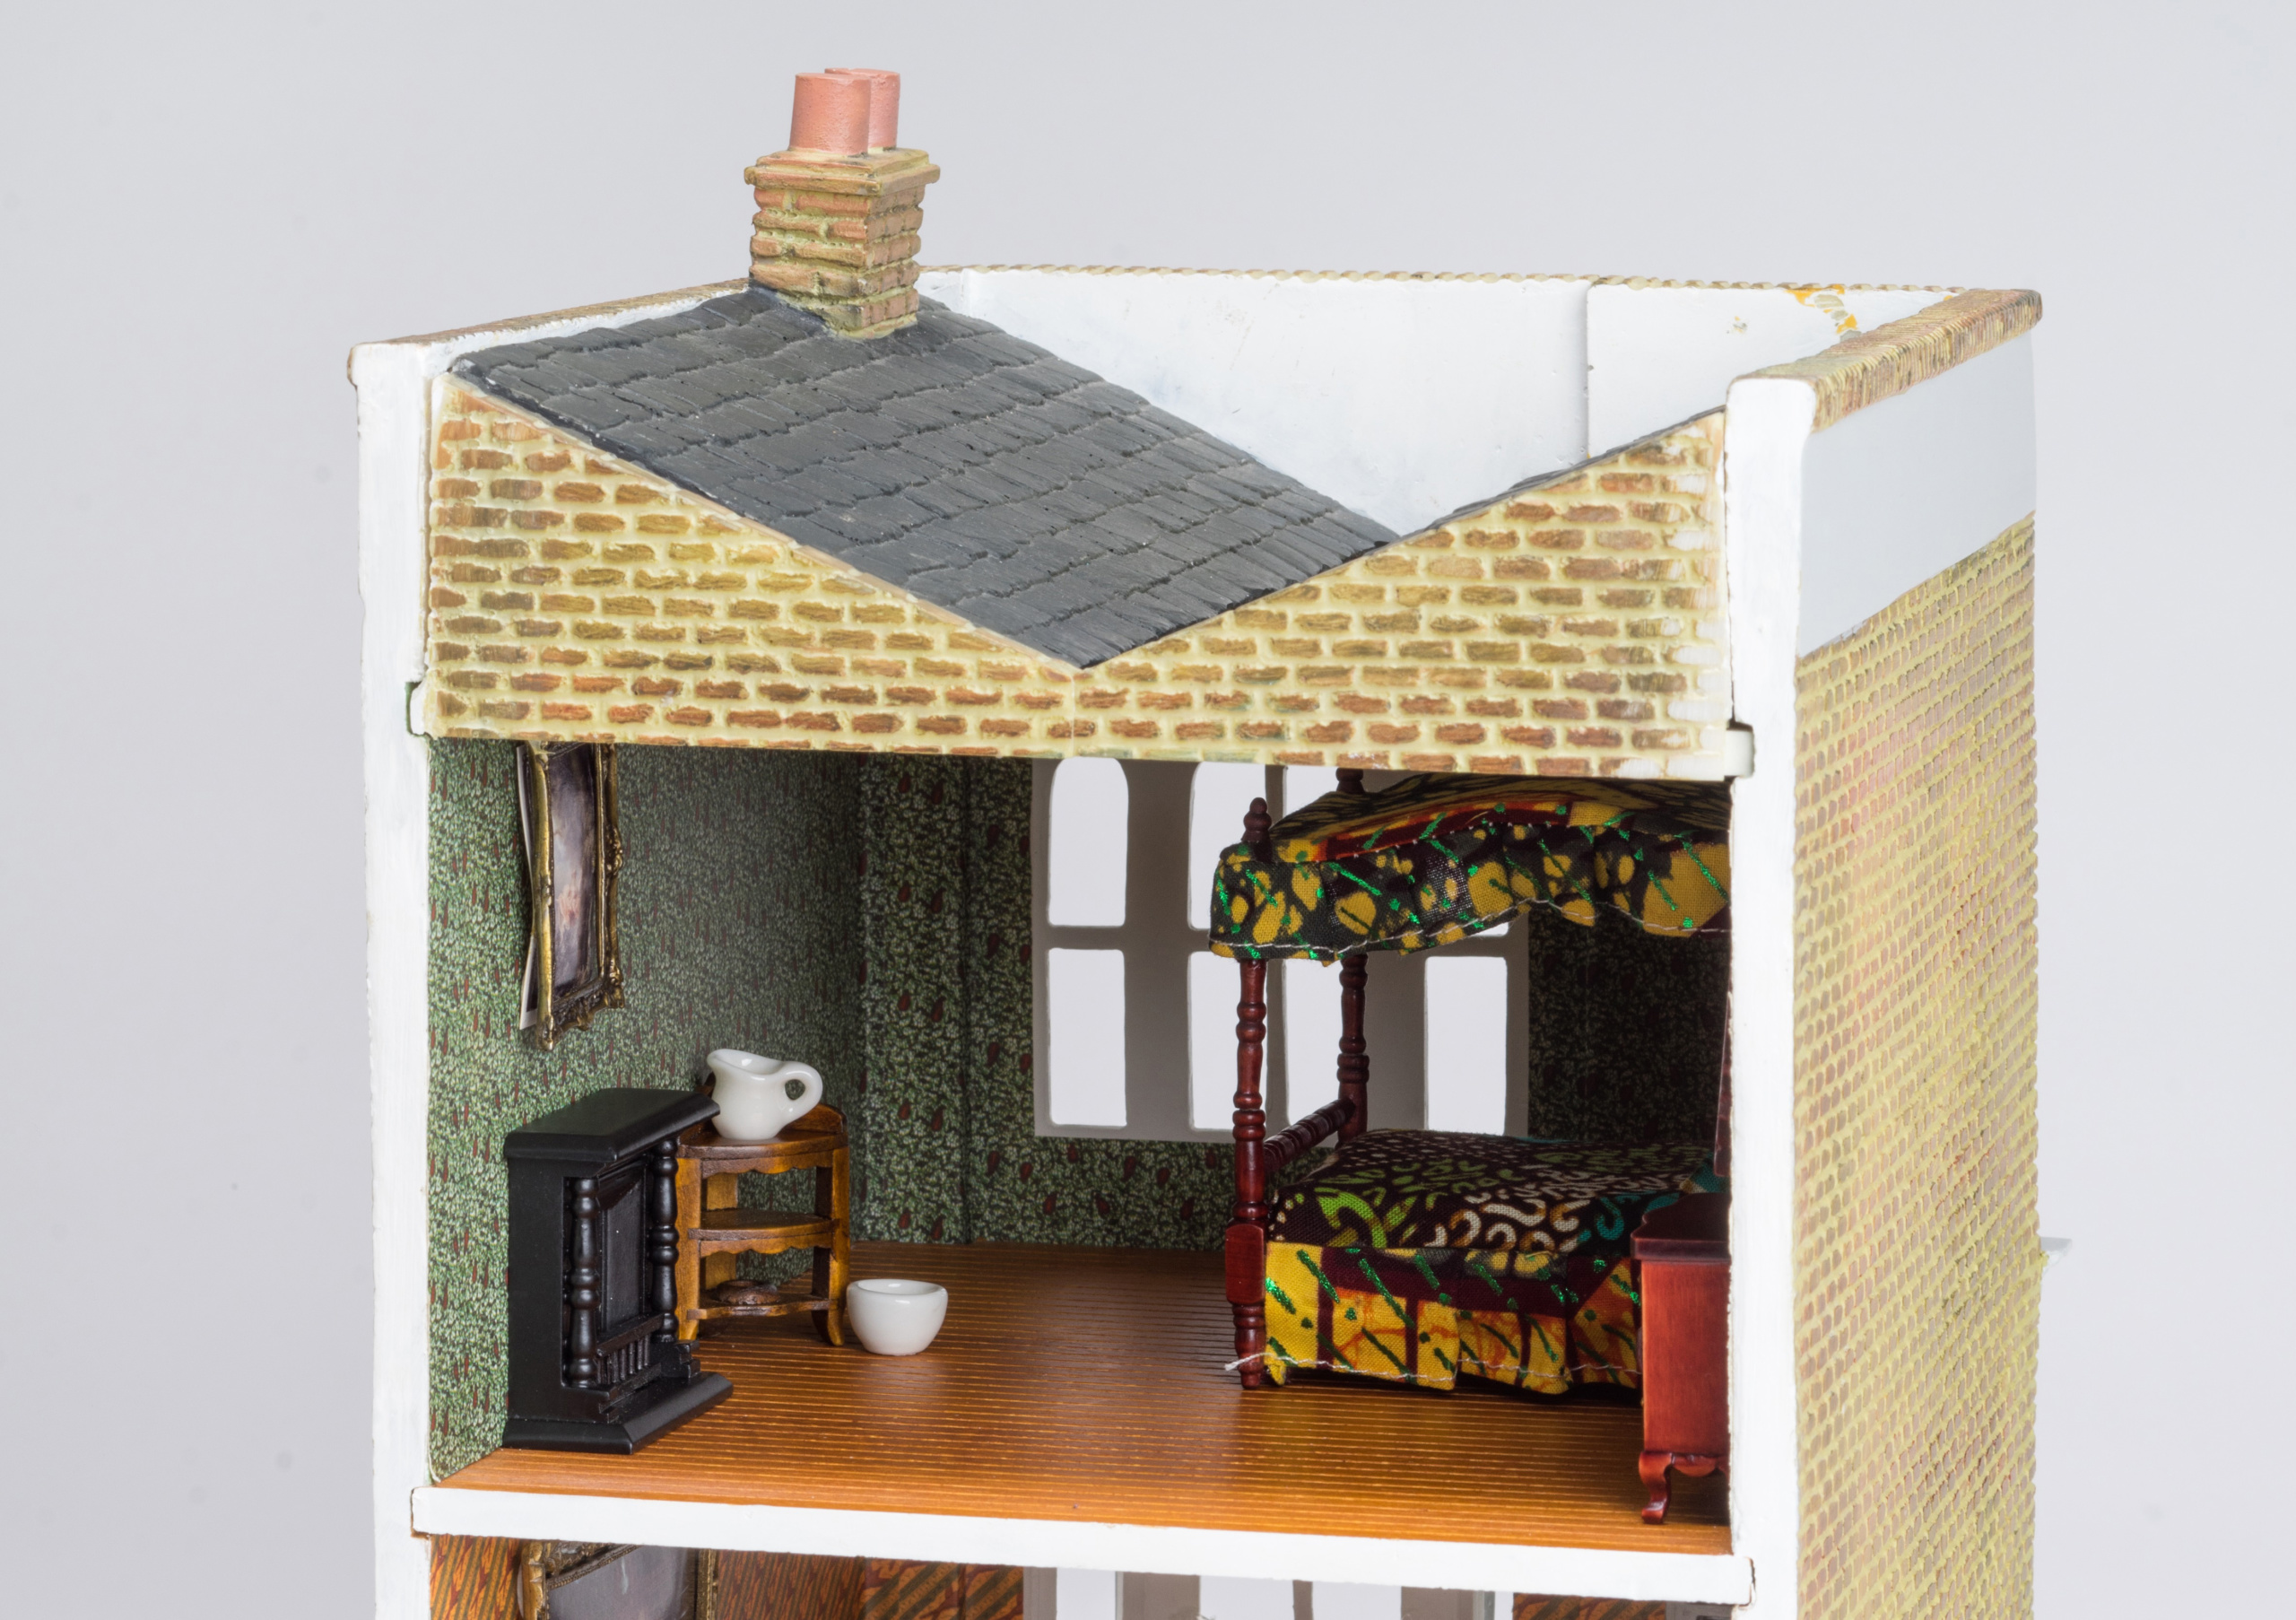 Photo of a dollhouse with traditional African textile patterns